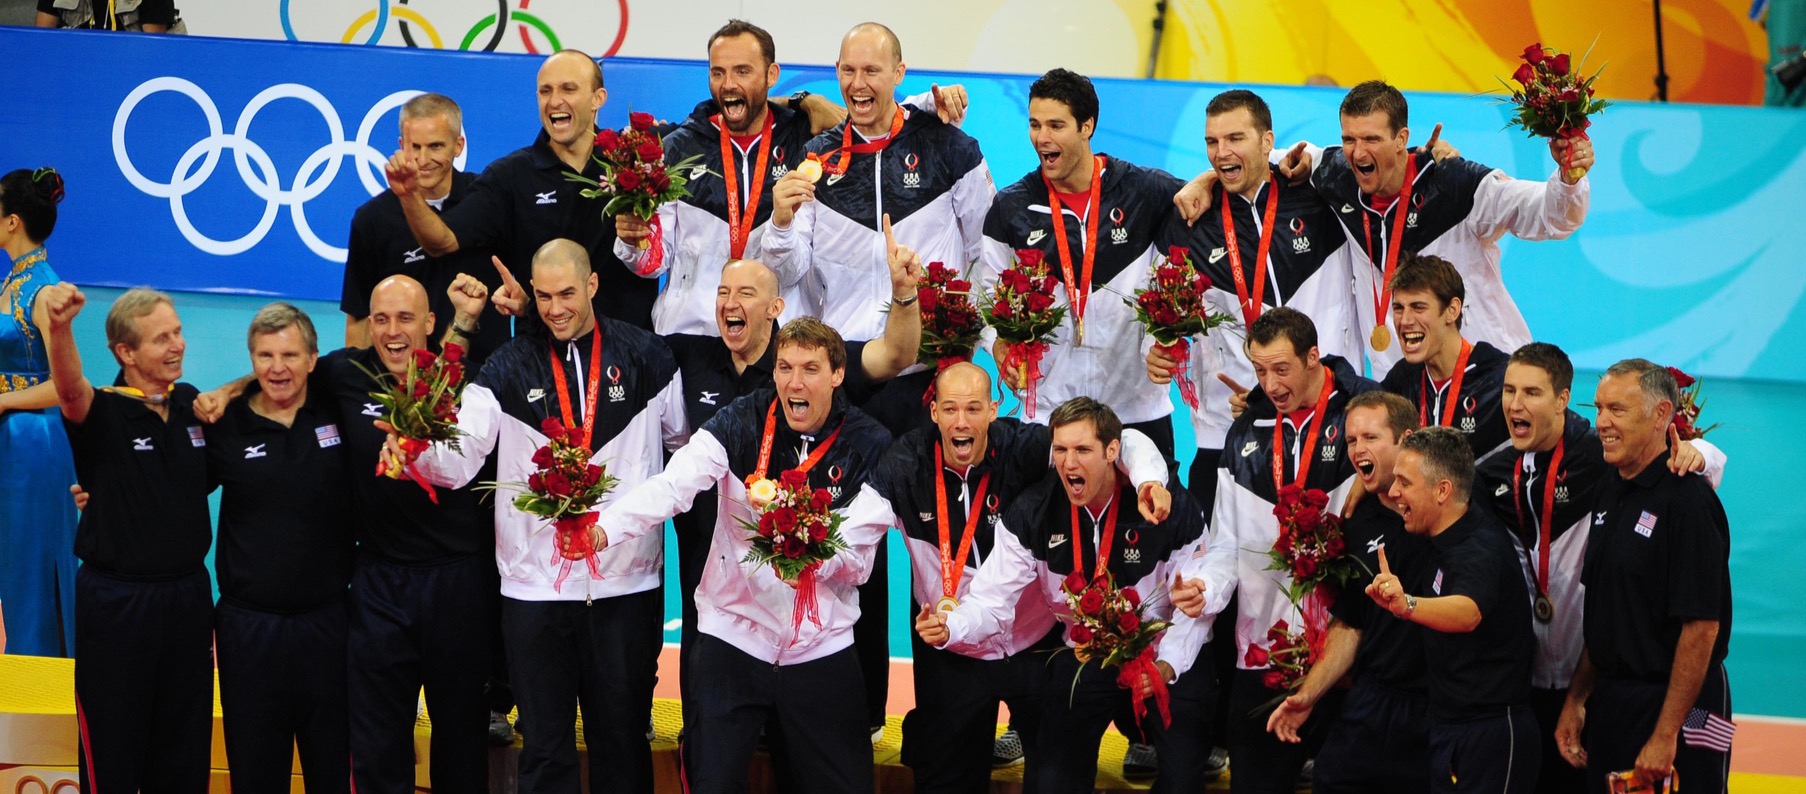 USA men's volleyball Beijing 2008 Olympics gold medal